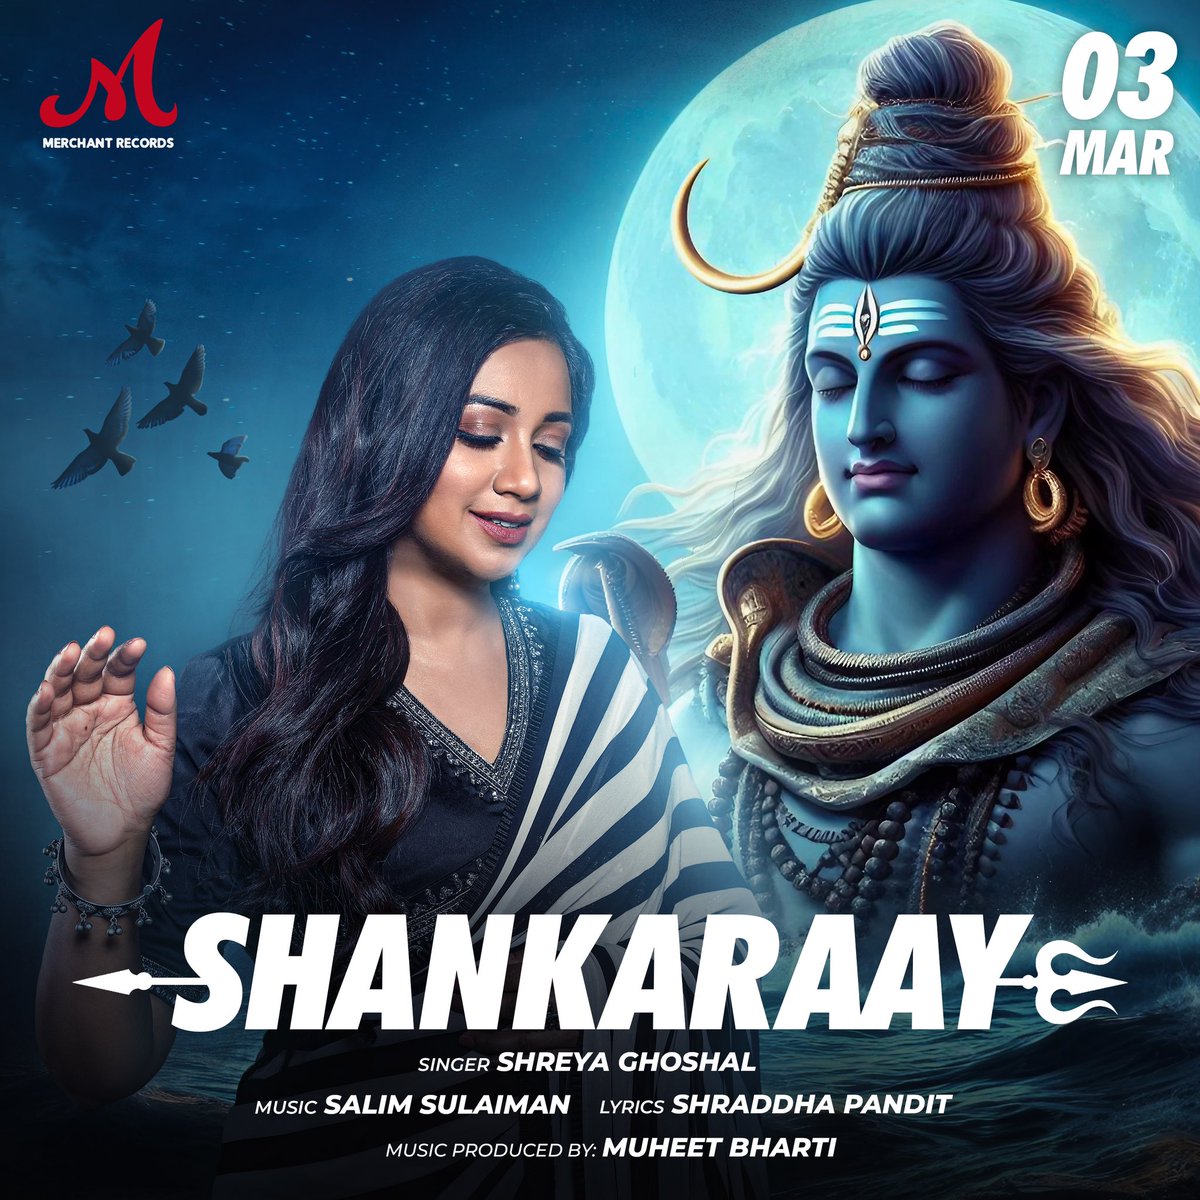 🕉️ Get ready to immerse yourself in the divine aura of #Shankaraay by @shreyaghoshal, composed by @SlimSulaiman. Written by @shraddhapandit. Releasing March 3rd on our YouTube channel and all streaming platforms. #HarHarMahadev 🙏 #MerchantRecords #SalimSulaiman